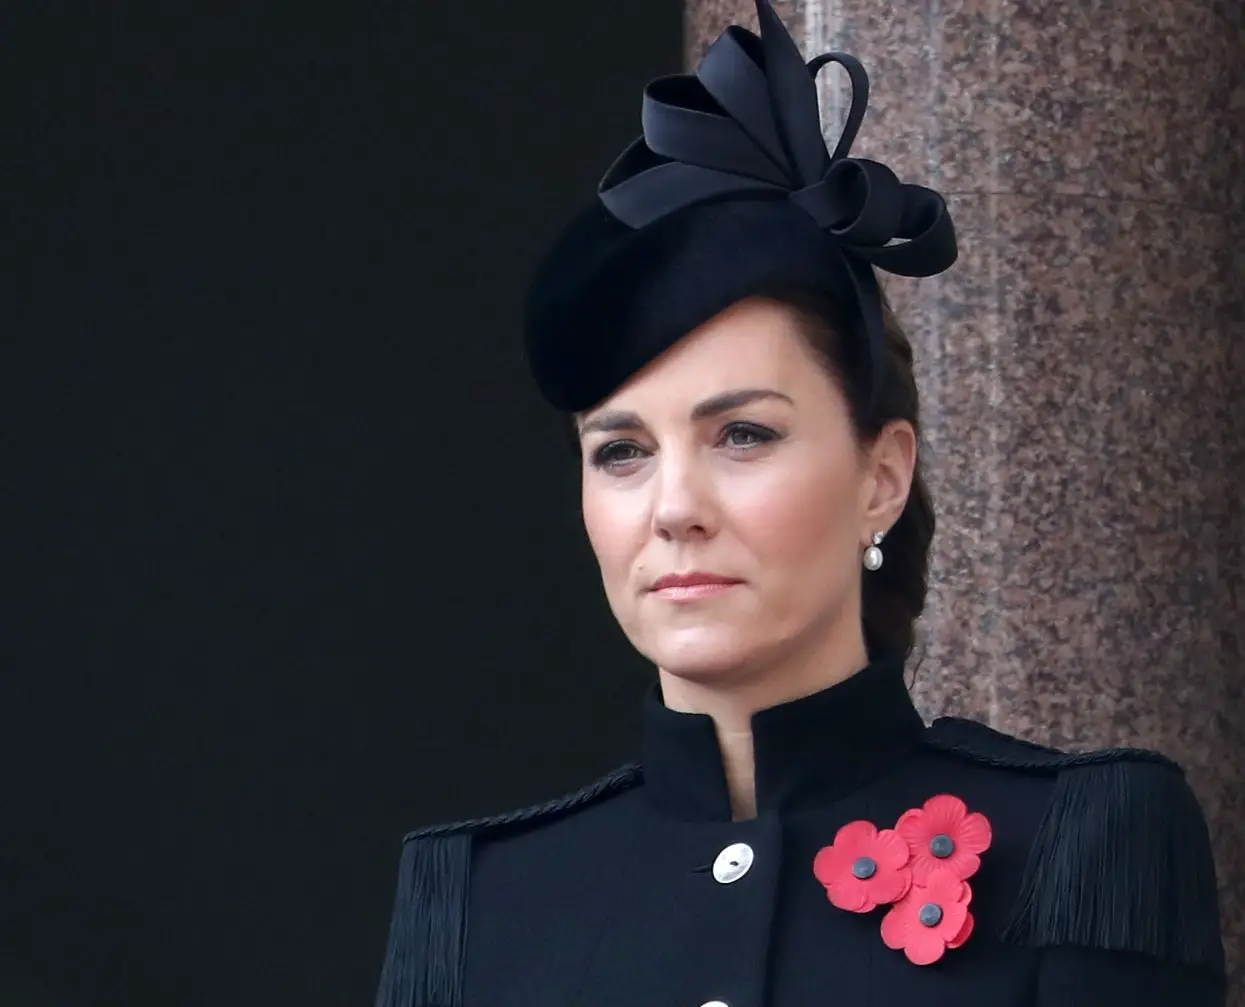 The Duchess of Cambridge at annual Remembrance Sunday service.